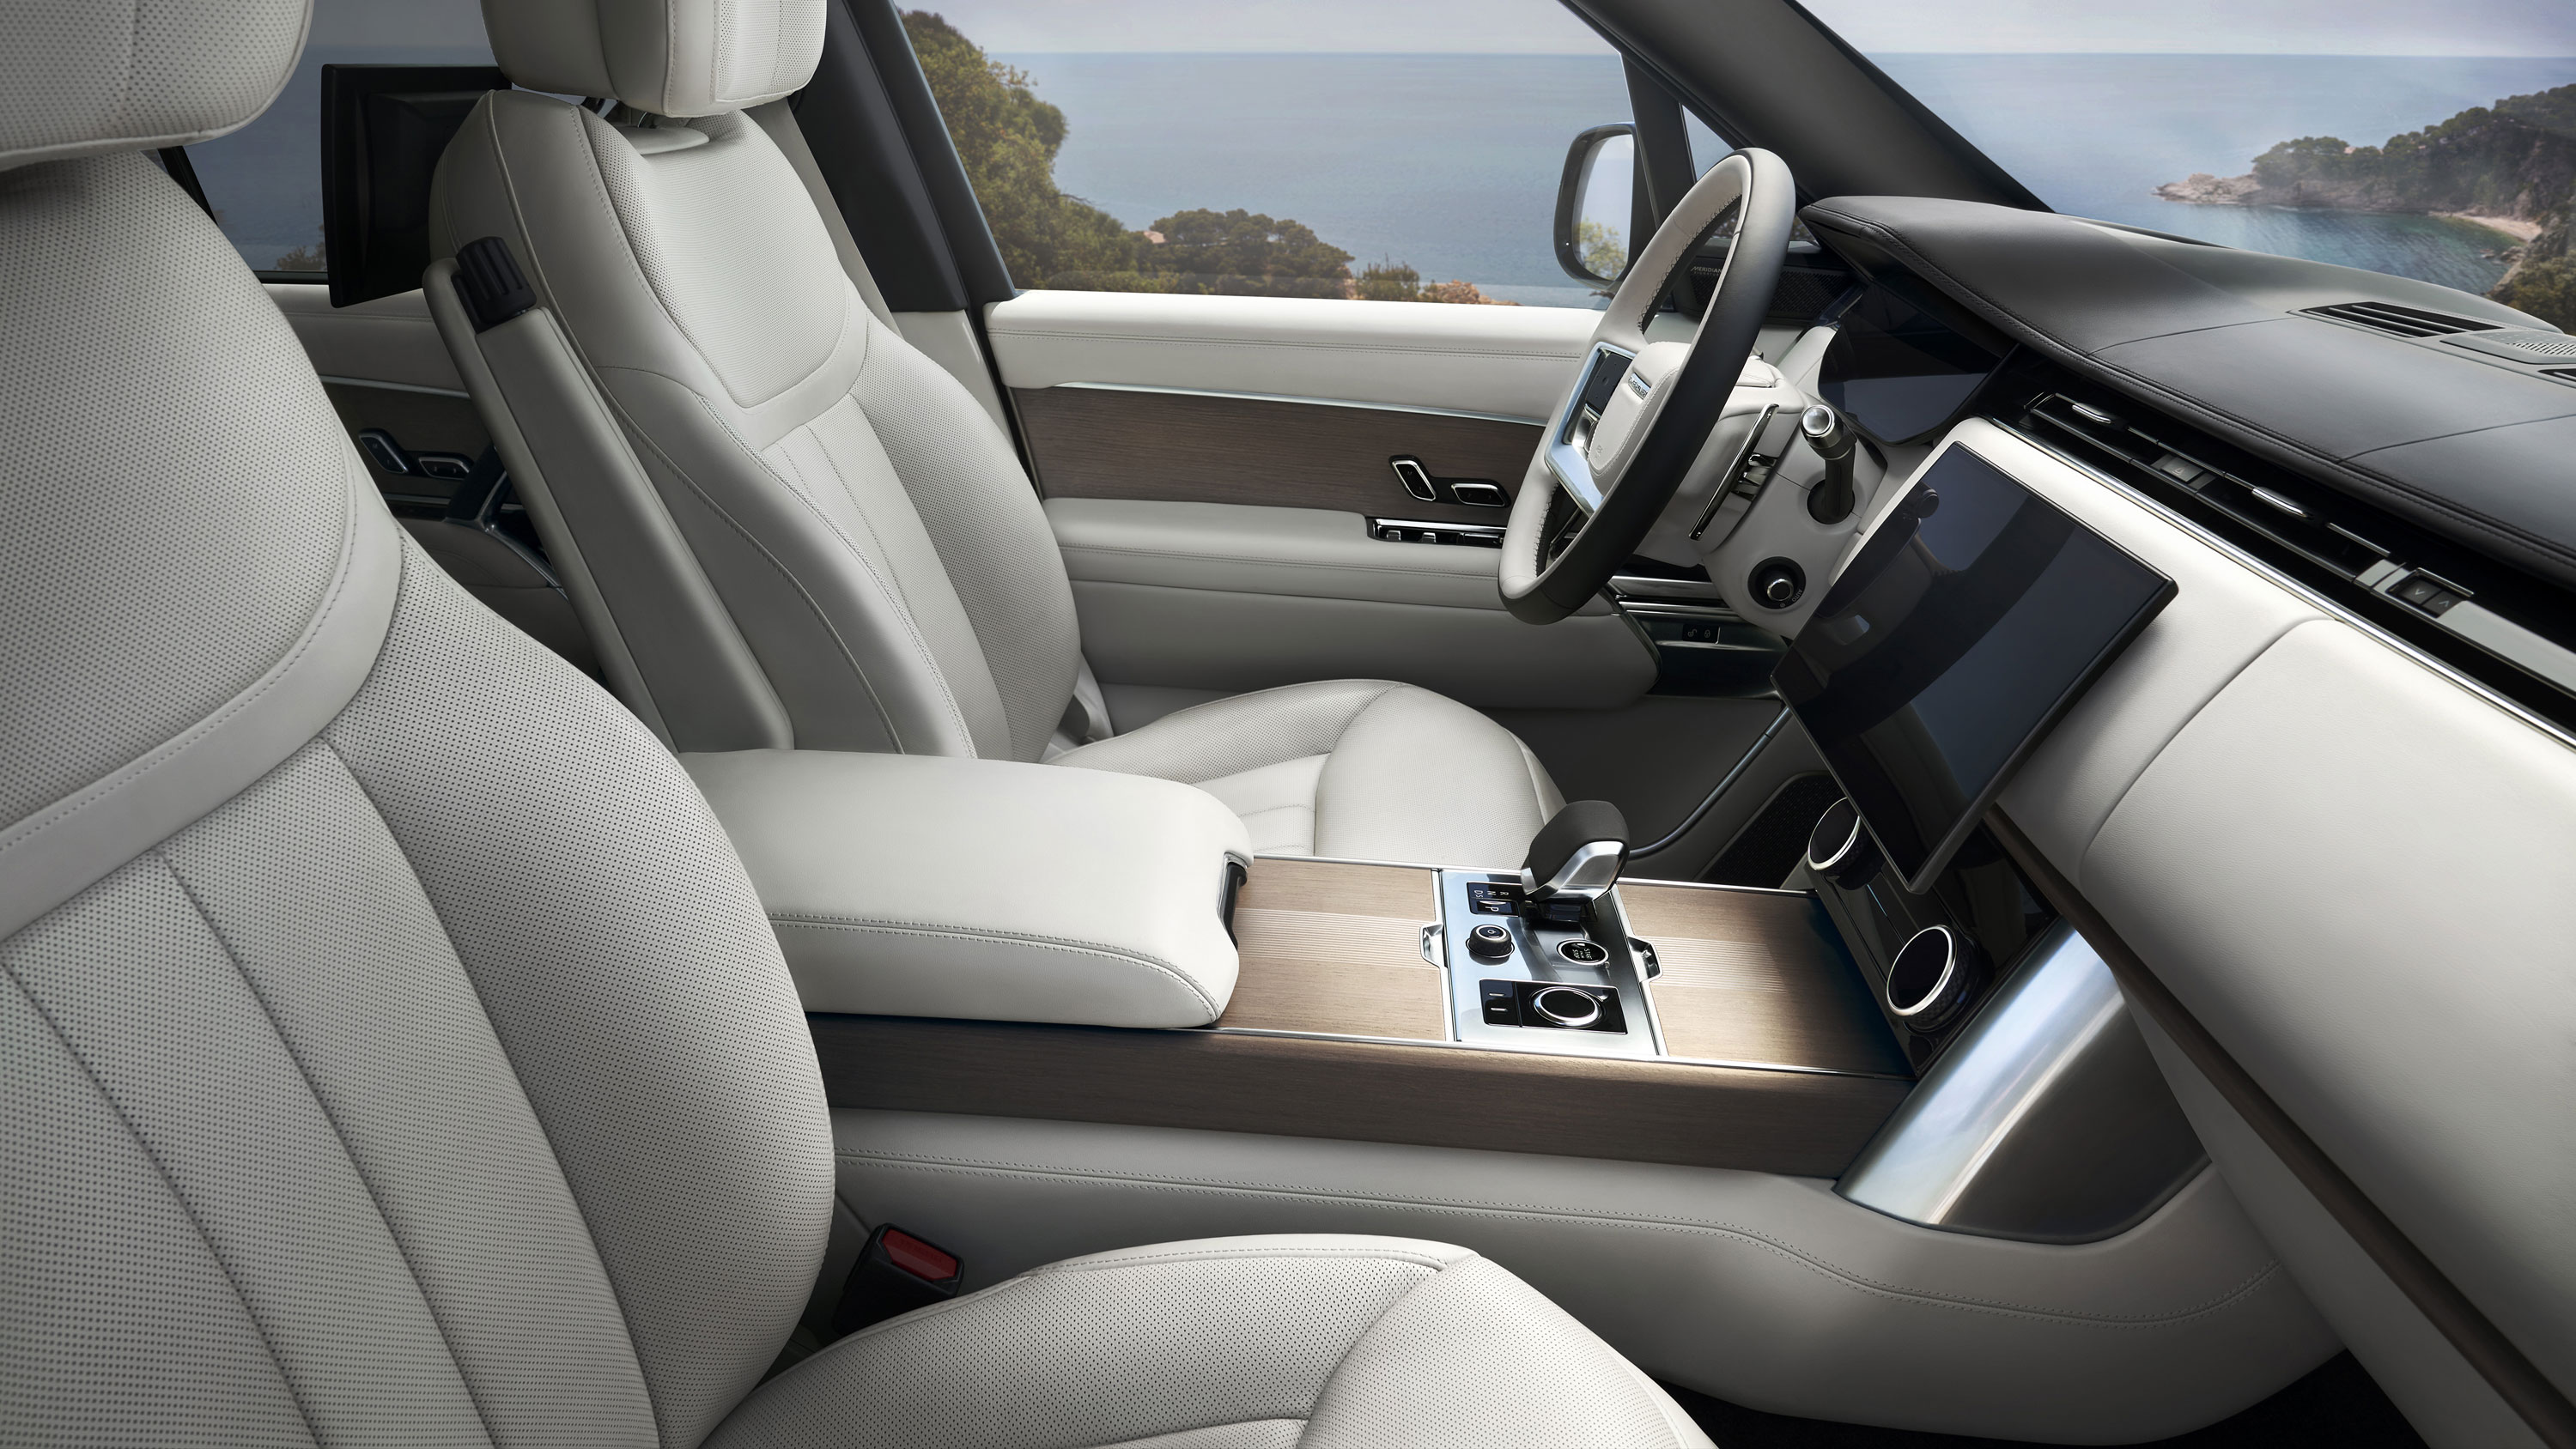 The front seats and dash in the 2022 Range Rover